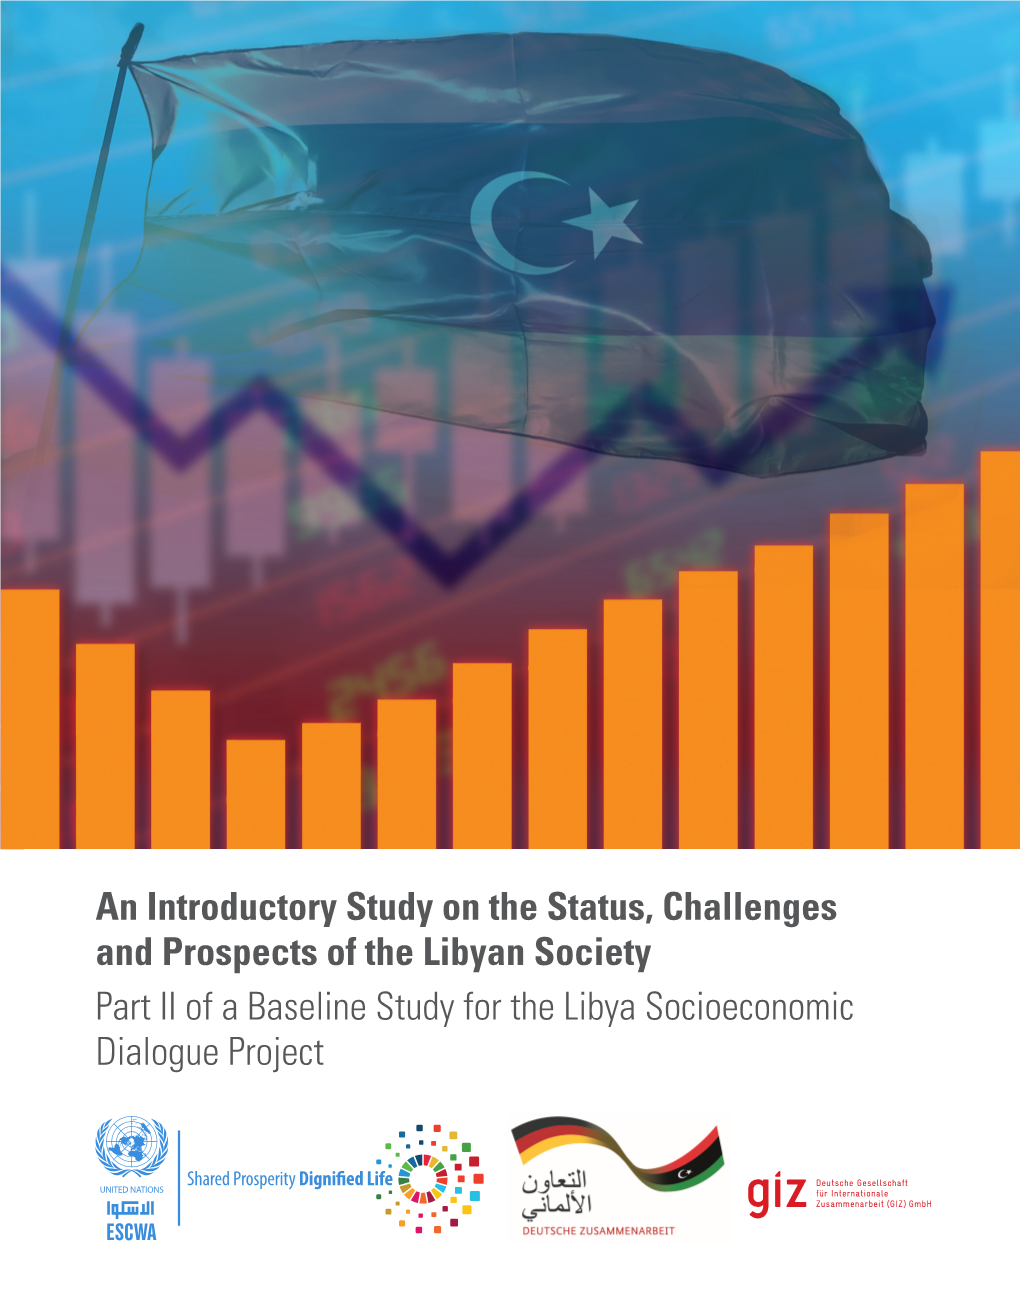 An Introductory Study on the Status, Challenges and Prospects of The